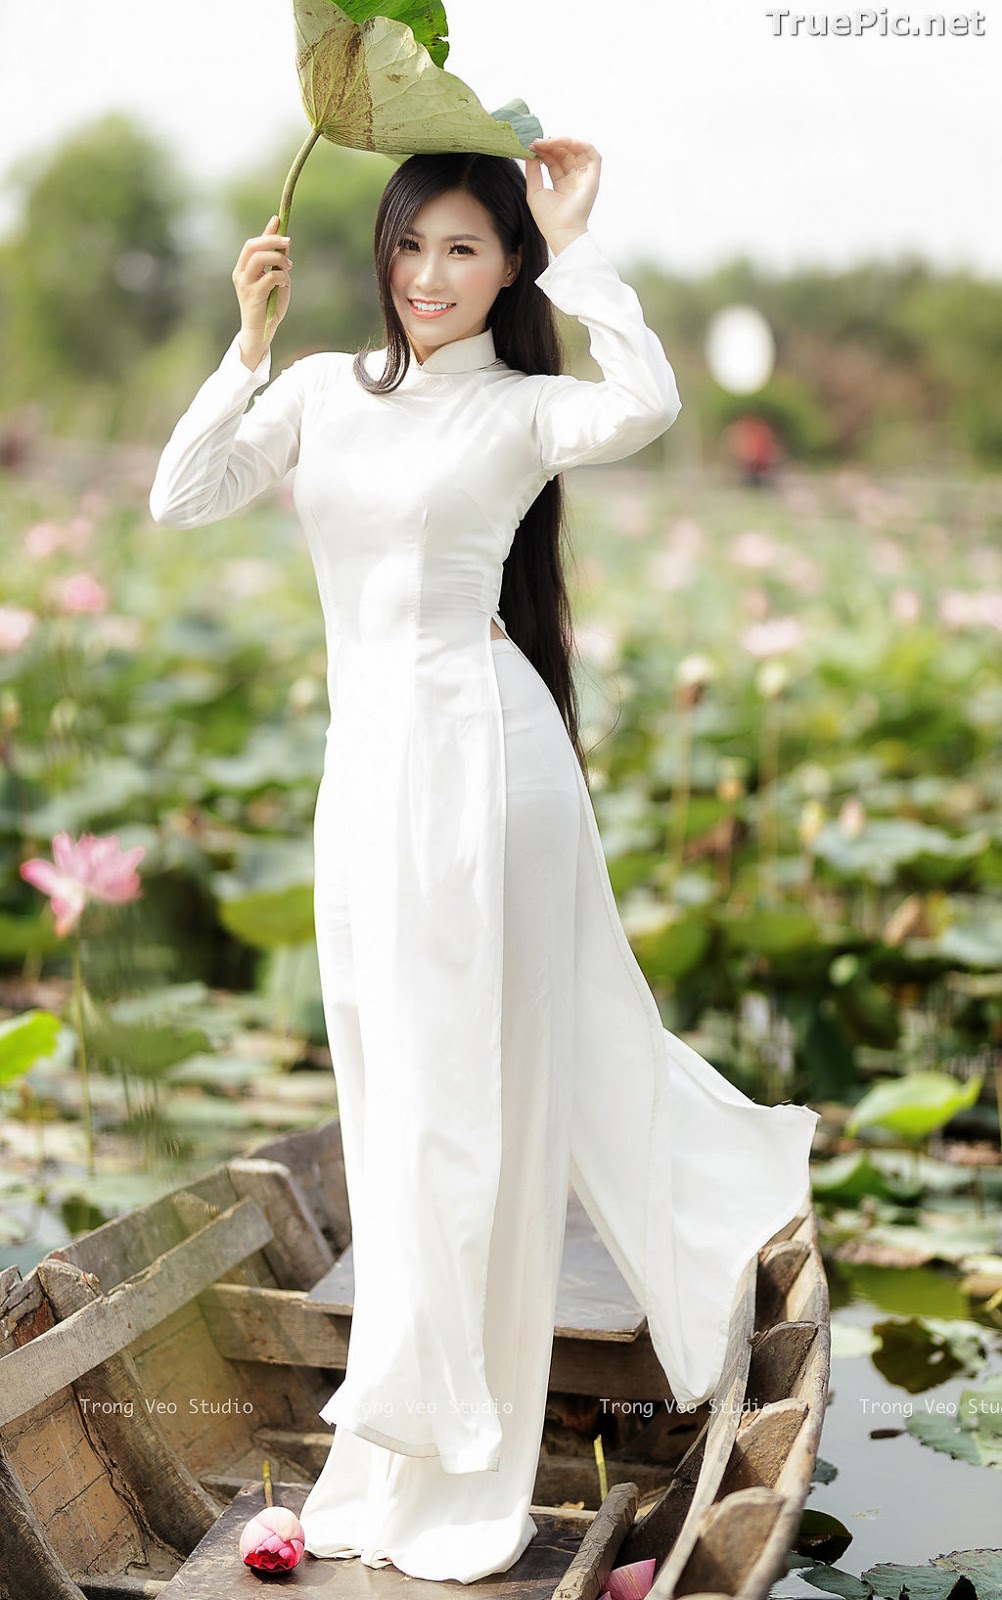 Image The Beauty of Vietnamese Girls with Traditional Dress (Ao Dai) #3 - TruePic.net - Picture-64